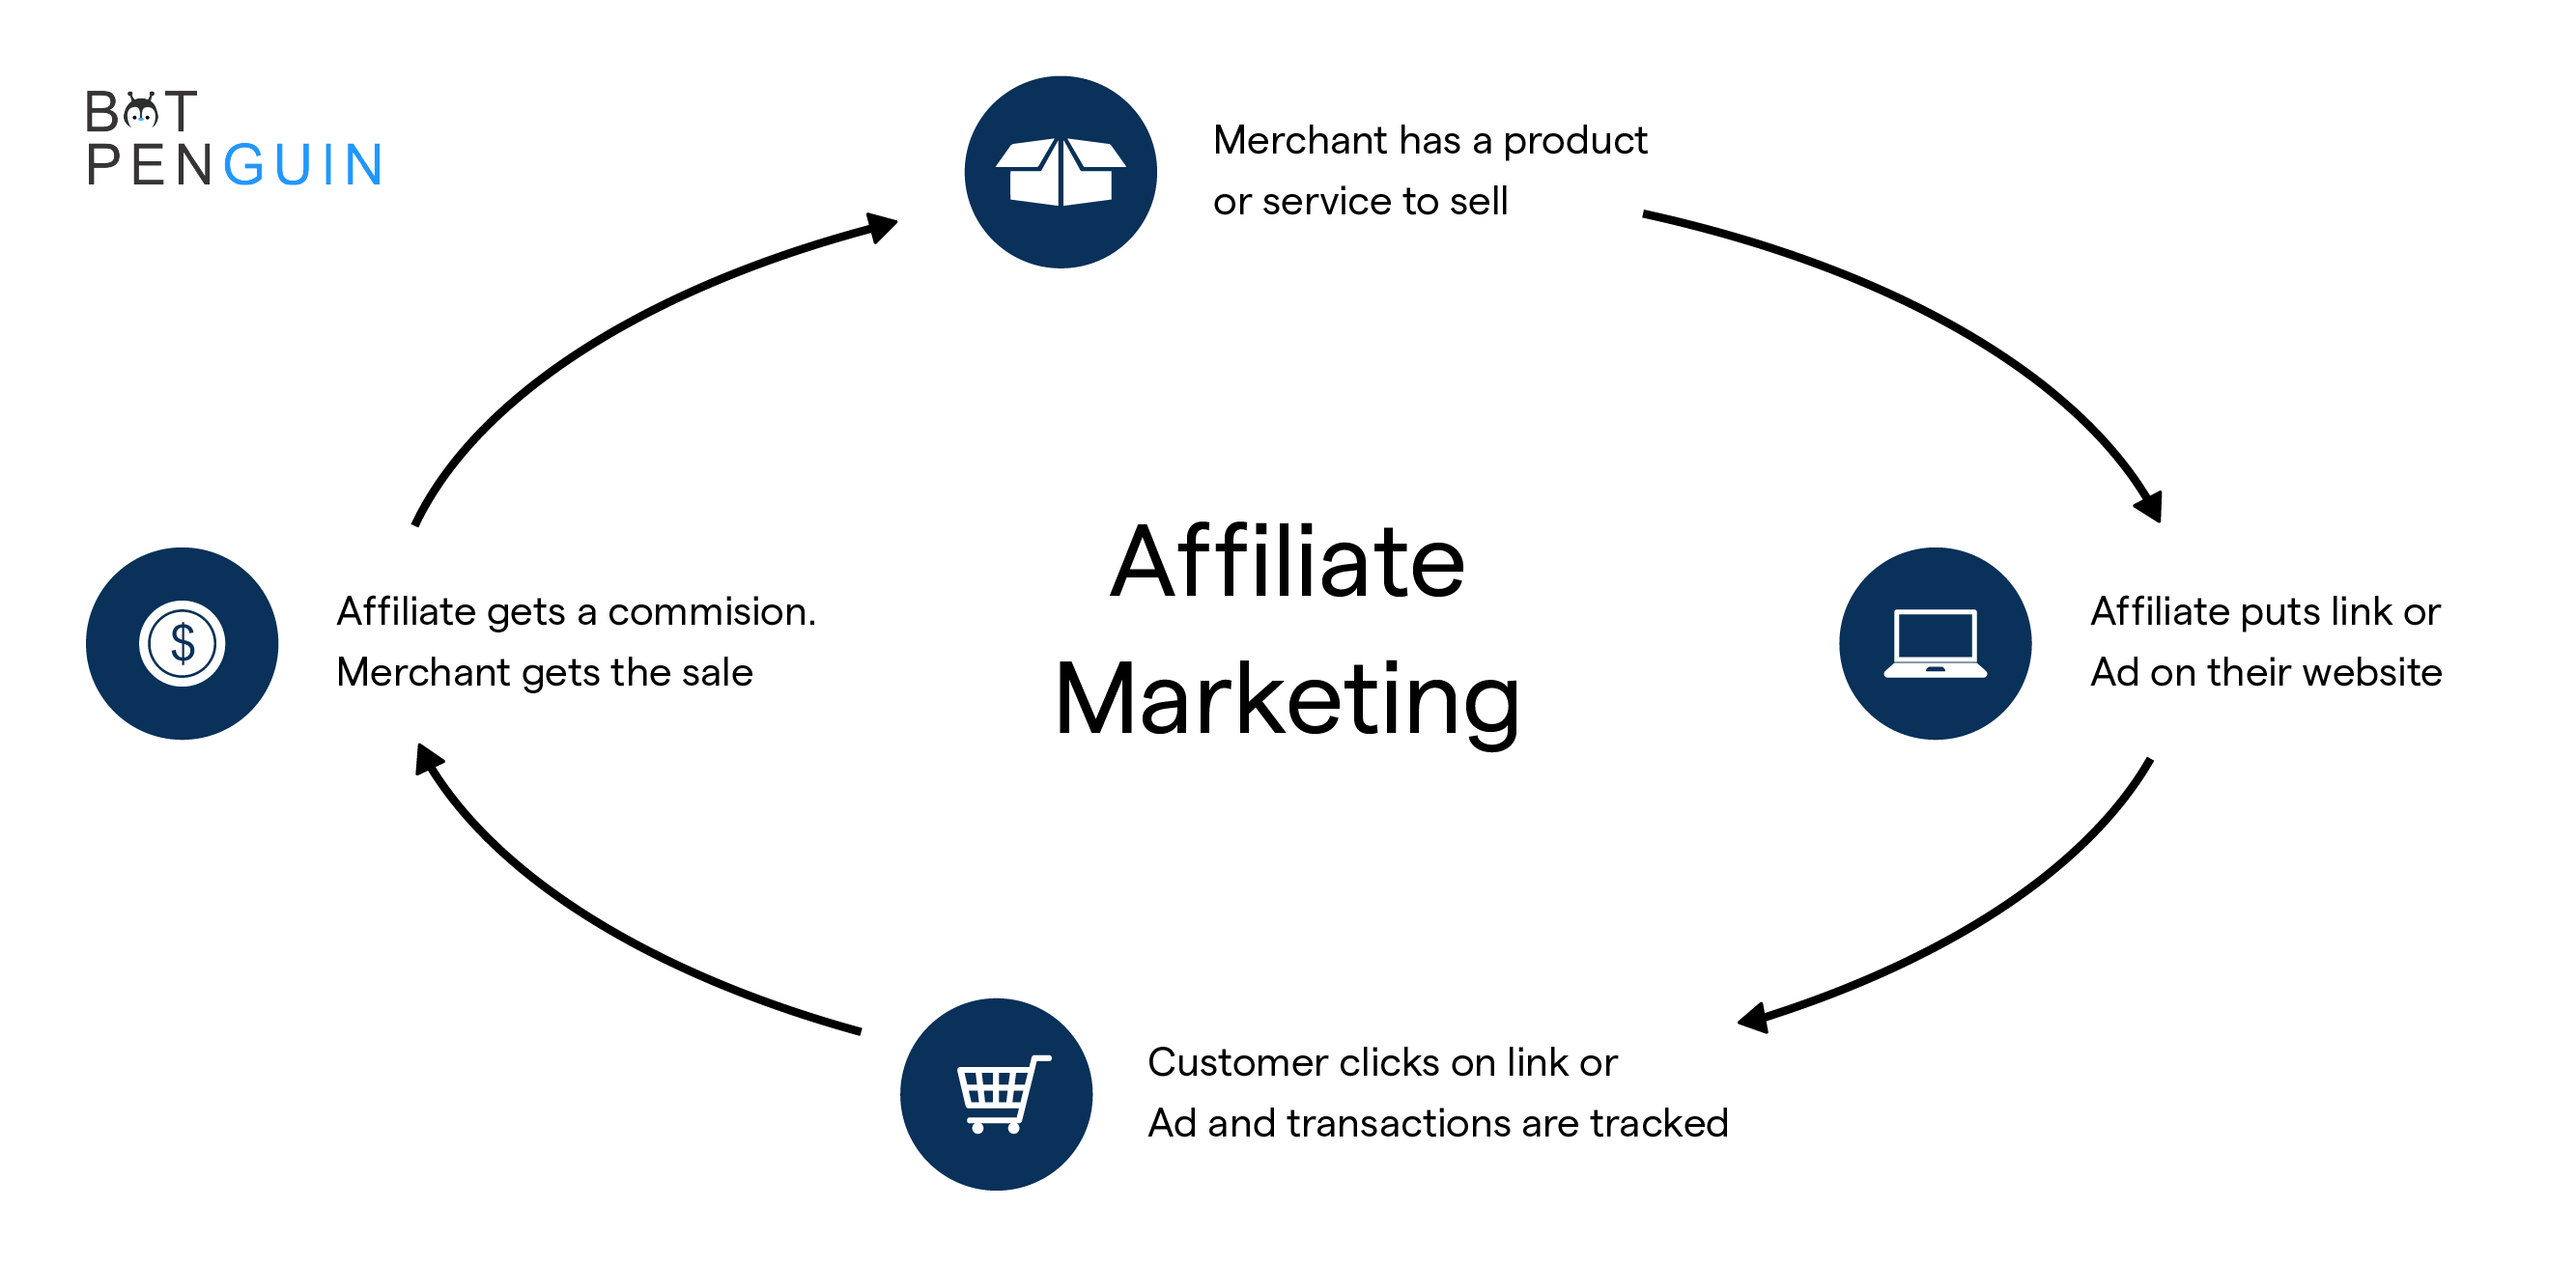 What is Affiliate marketing and how does it work